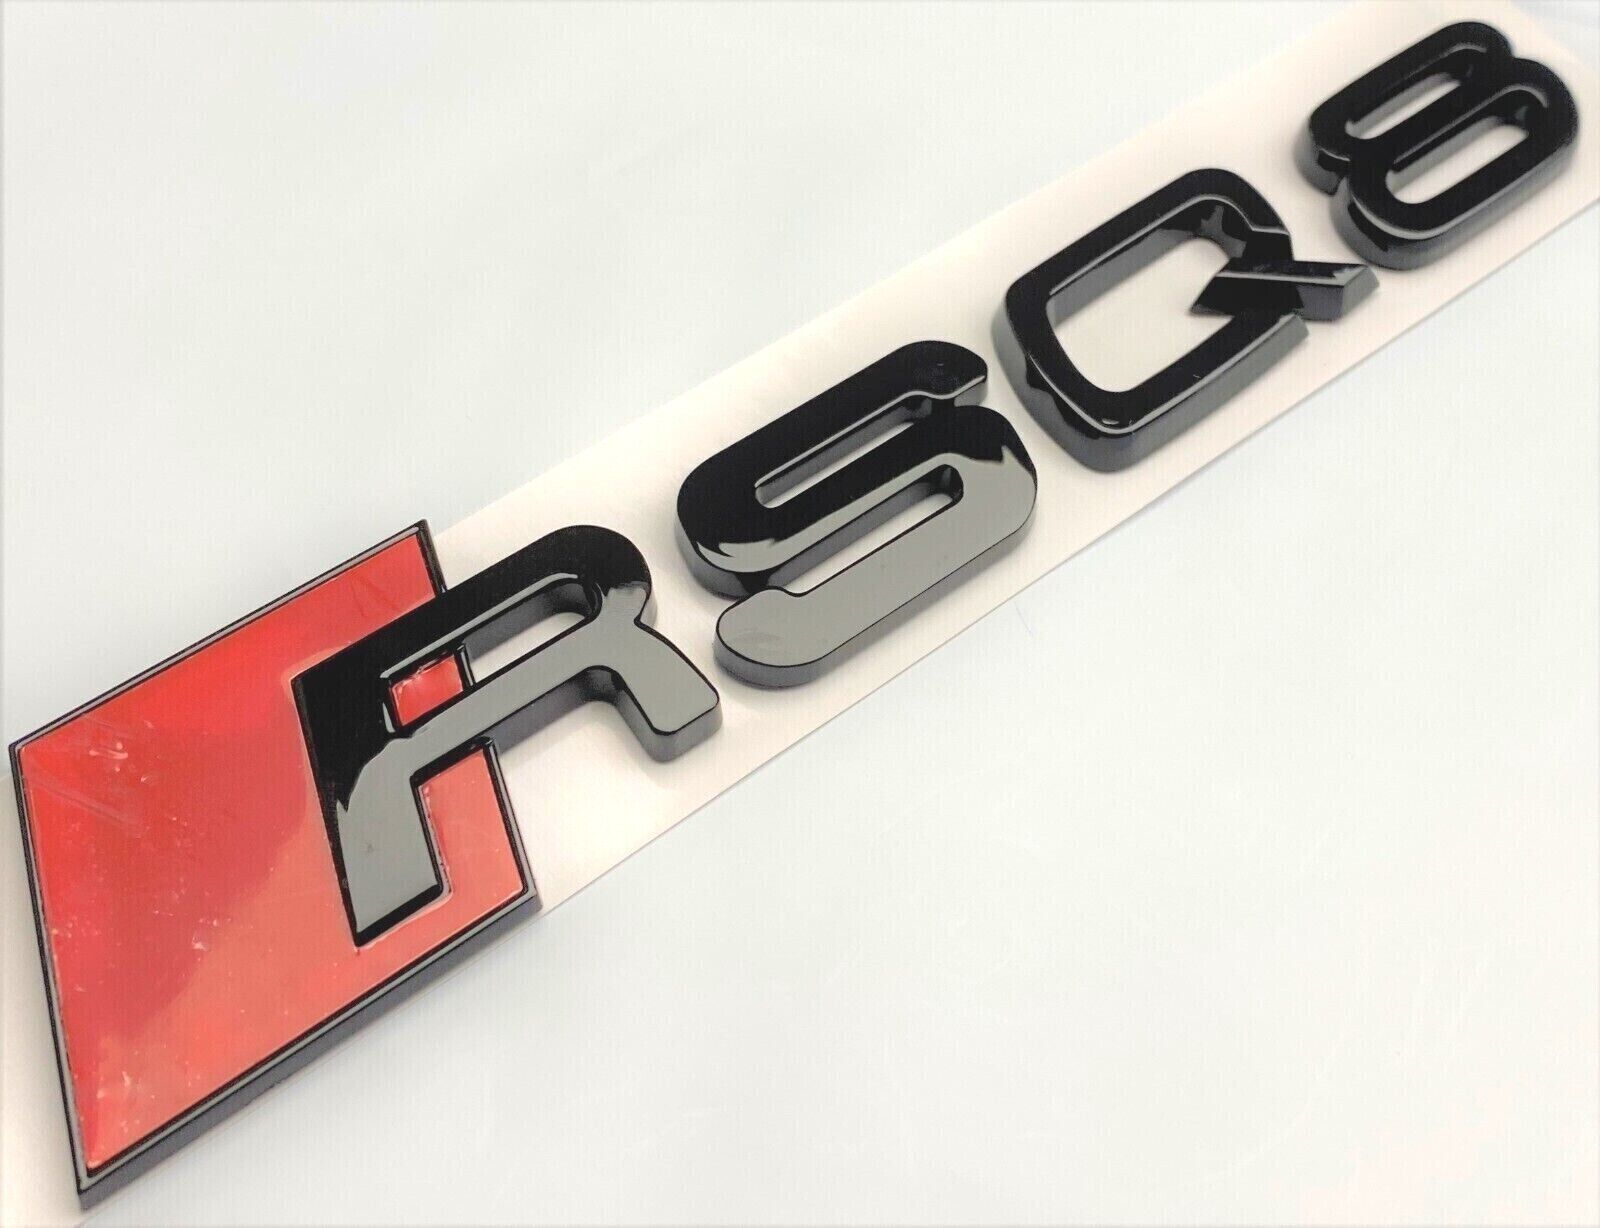 BLACK RSQ8 FIT AUDI RSQ8 REAR TRUNK EMBLEM BADGE NAME DECAL LETTER NUMBER